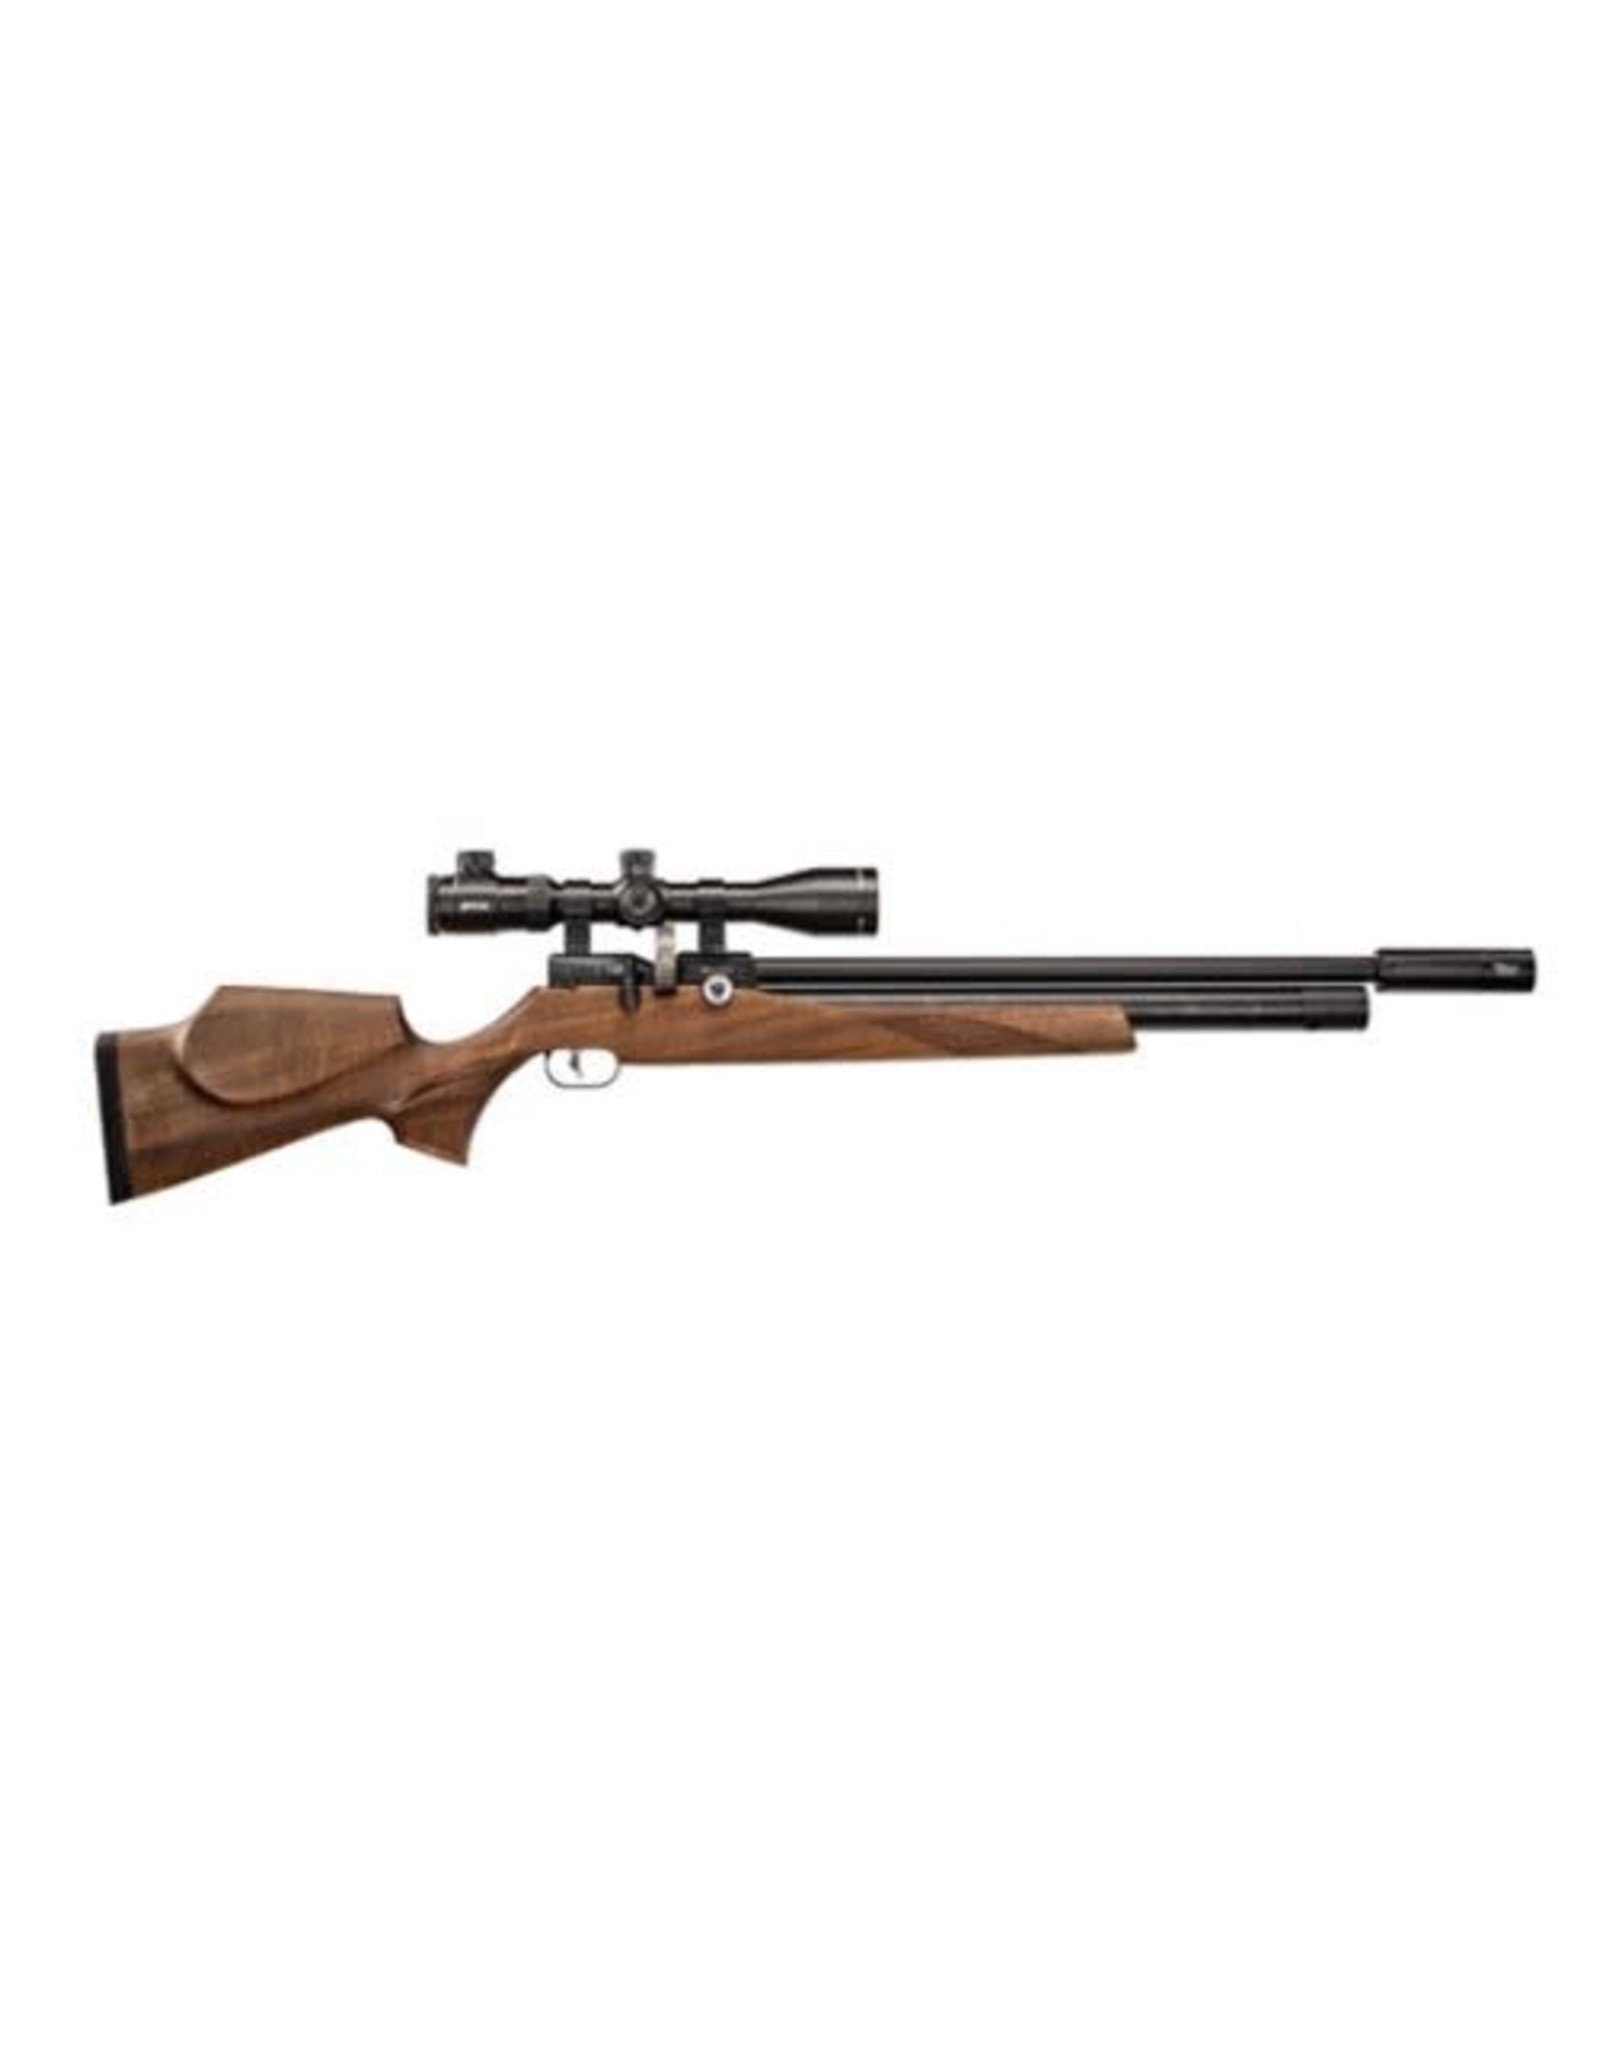 FX Airguns .22 (5.5mm) Cal. FX Dreamline Dream-Classic PCP Air Rifle with 500mm Barrel | DonnyFL Moderator | Walnut Stock with 18 Round Side-Shot Magazine